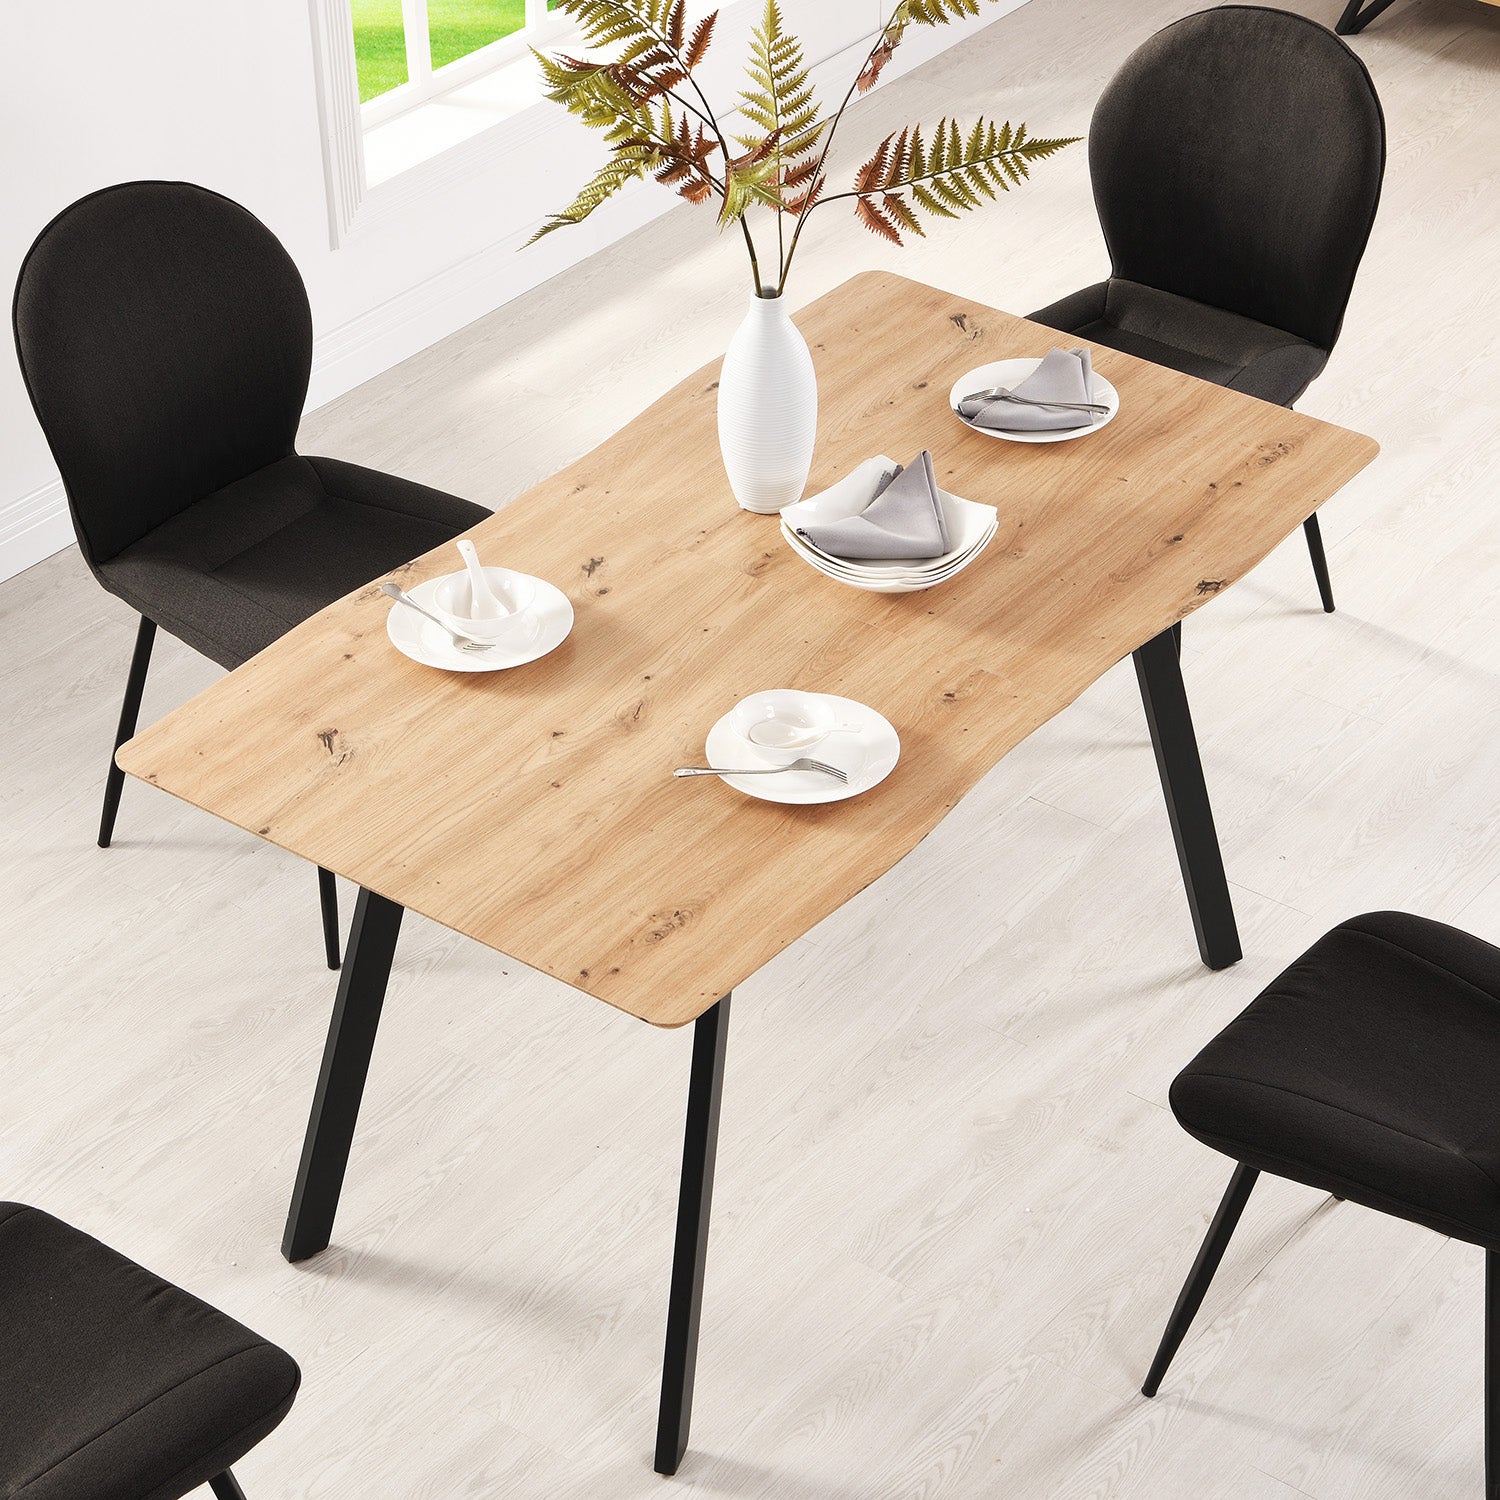 Weston Oak Effect Extendable 6-8 Seater Dining Table